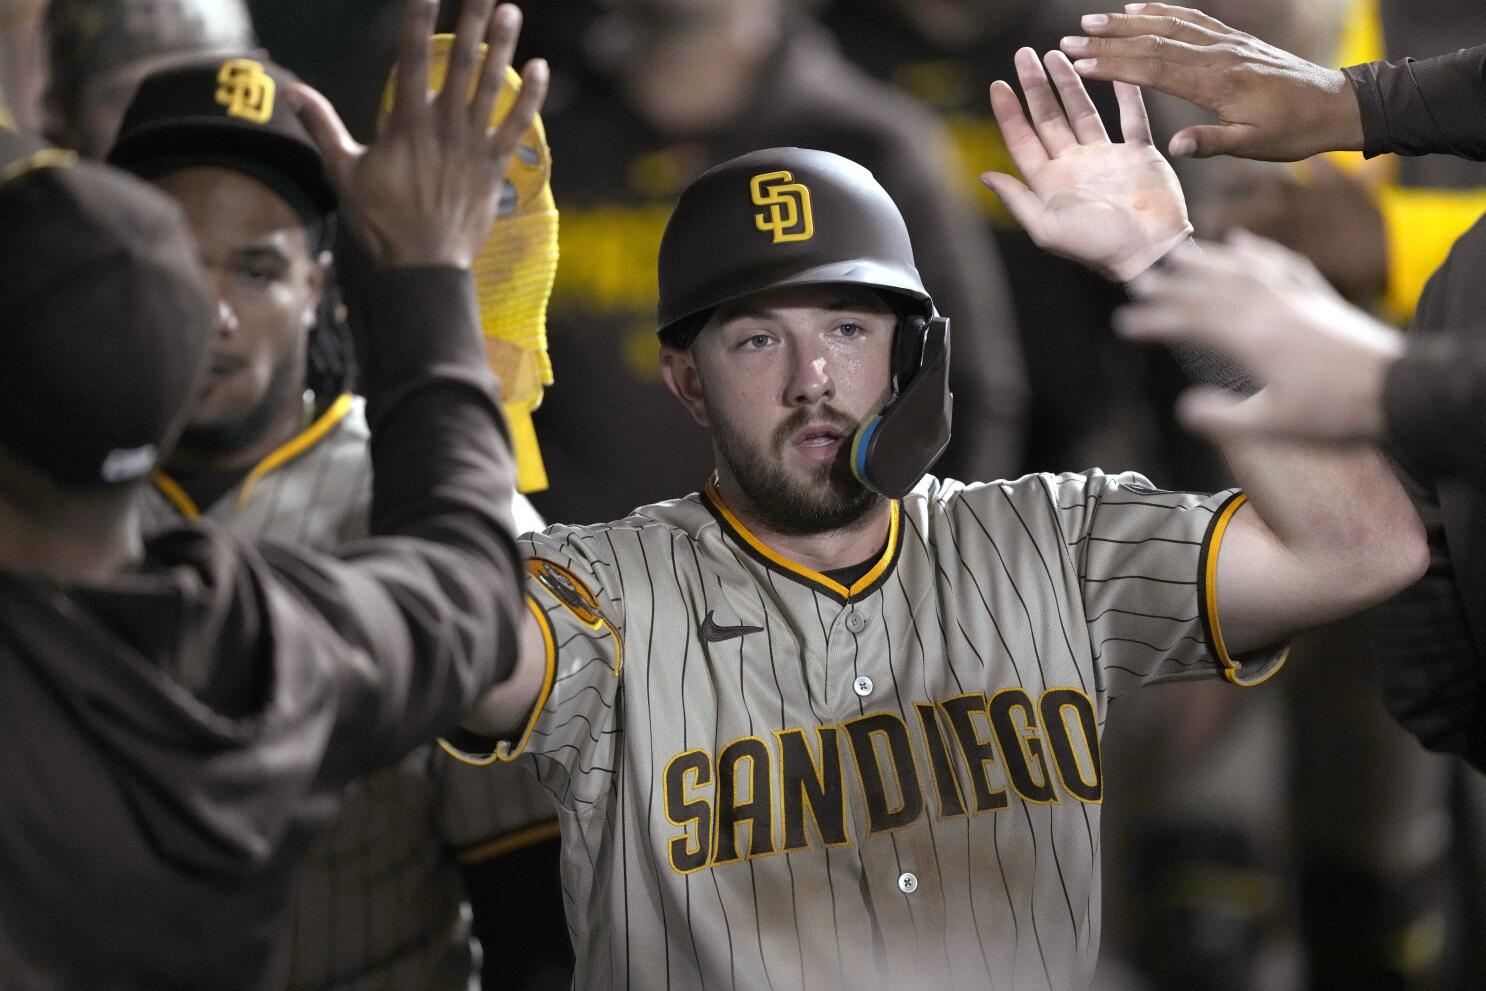 Final 4: What are your favorite Padres uniforms of all-time